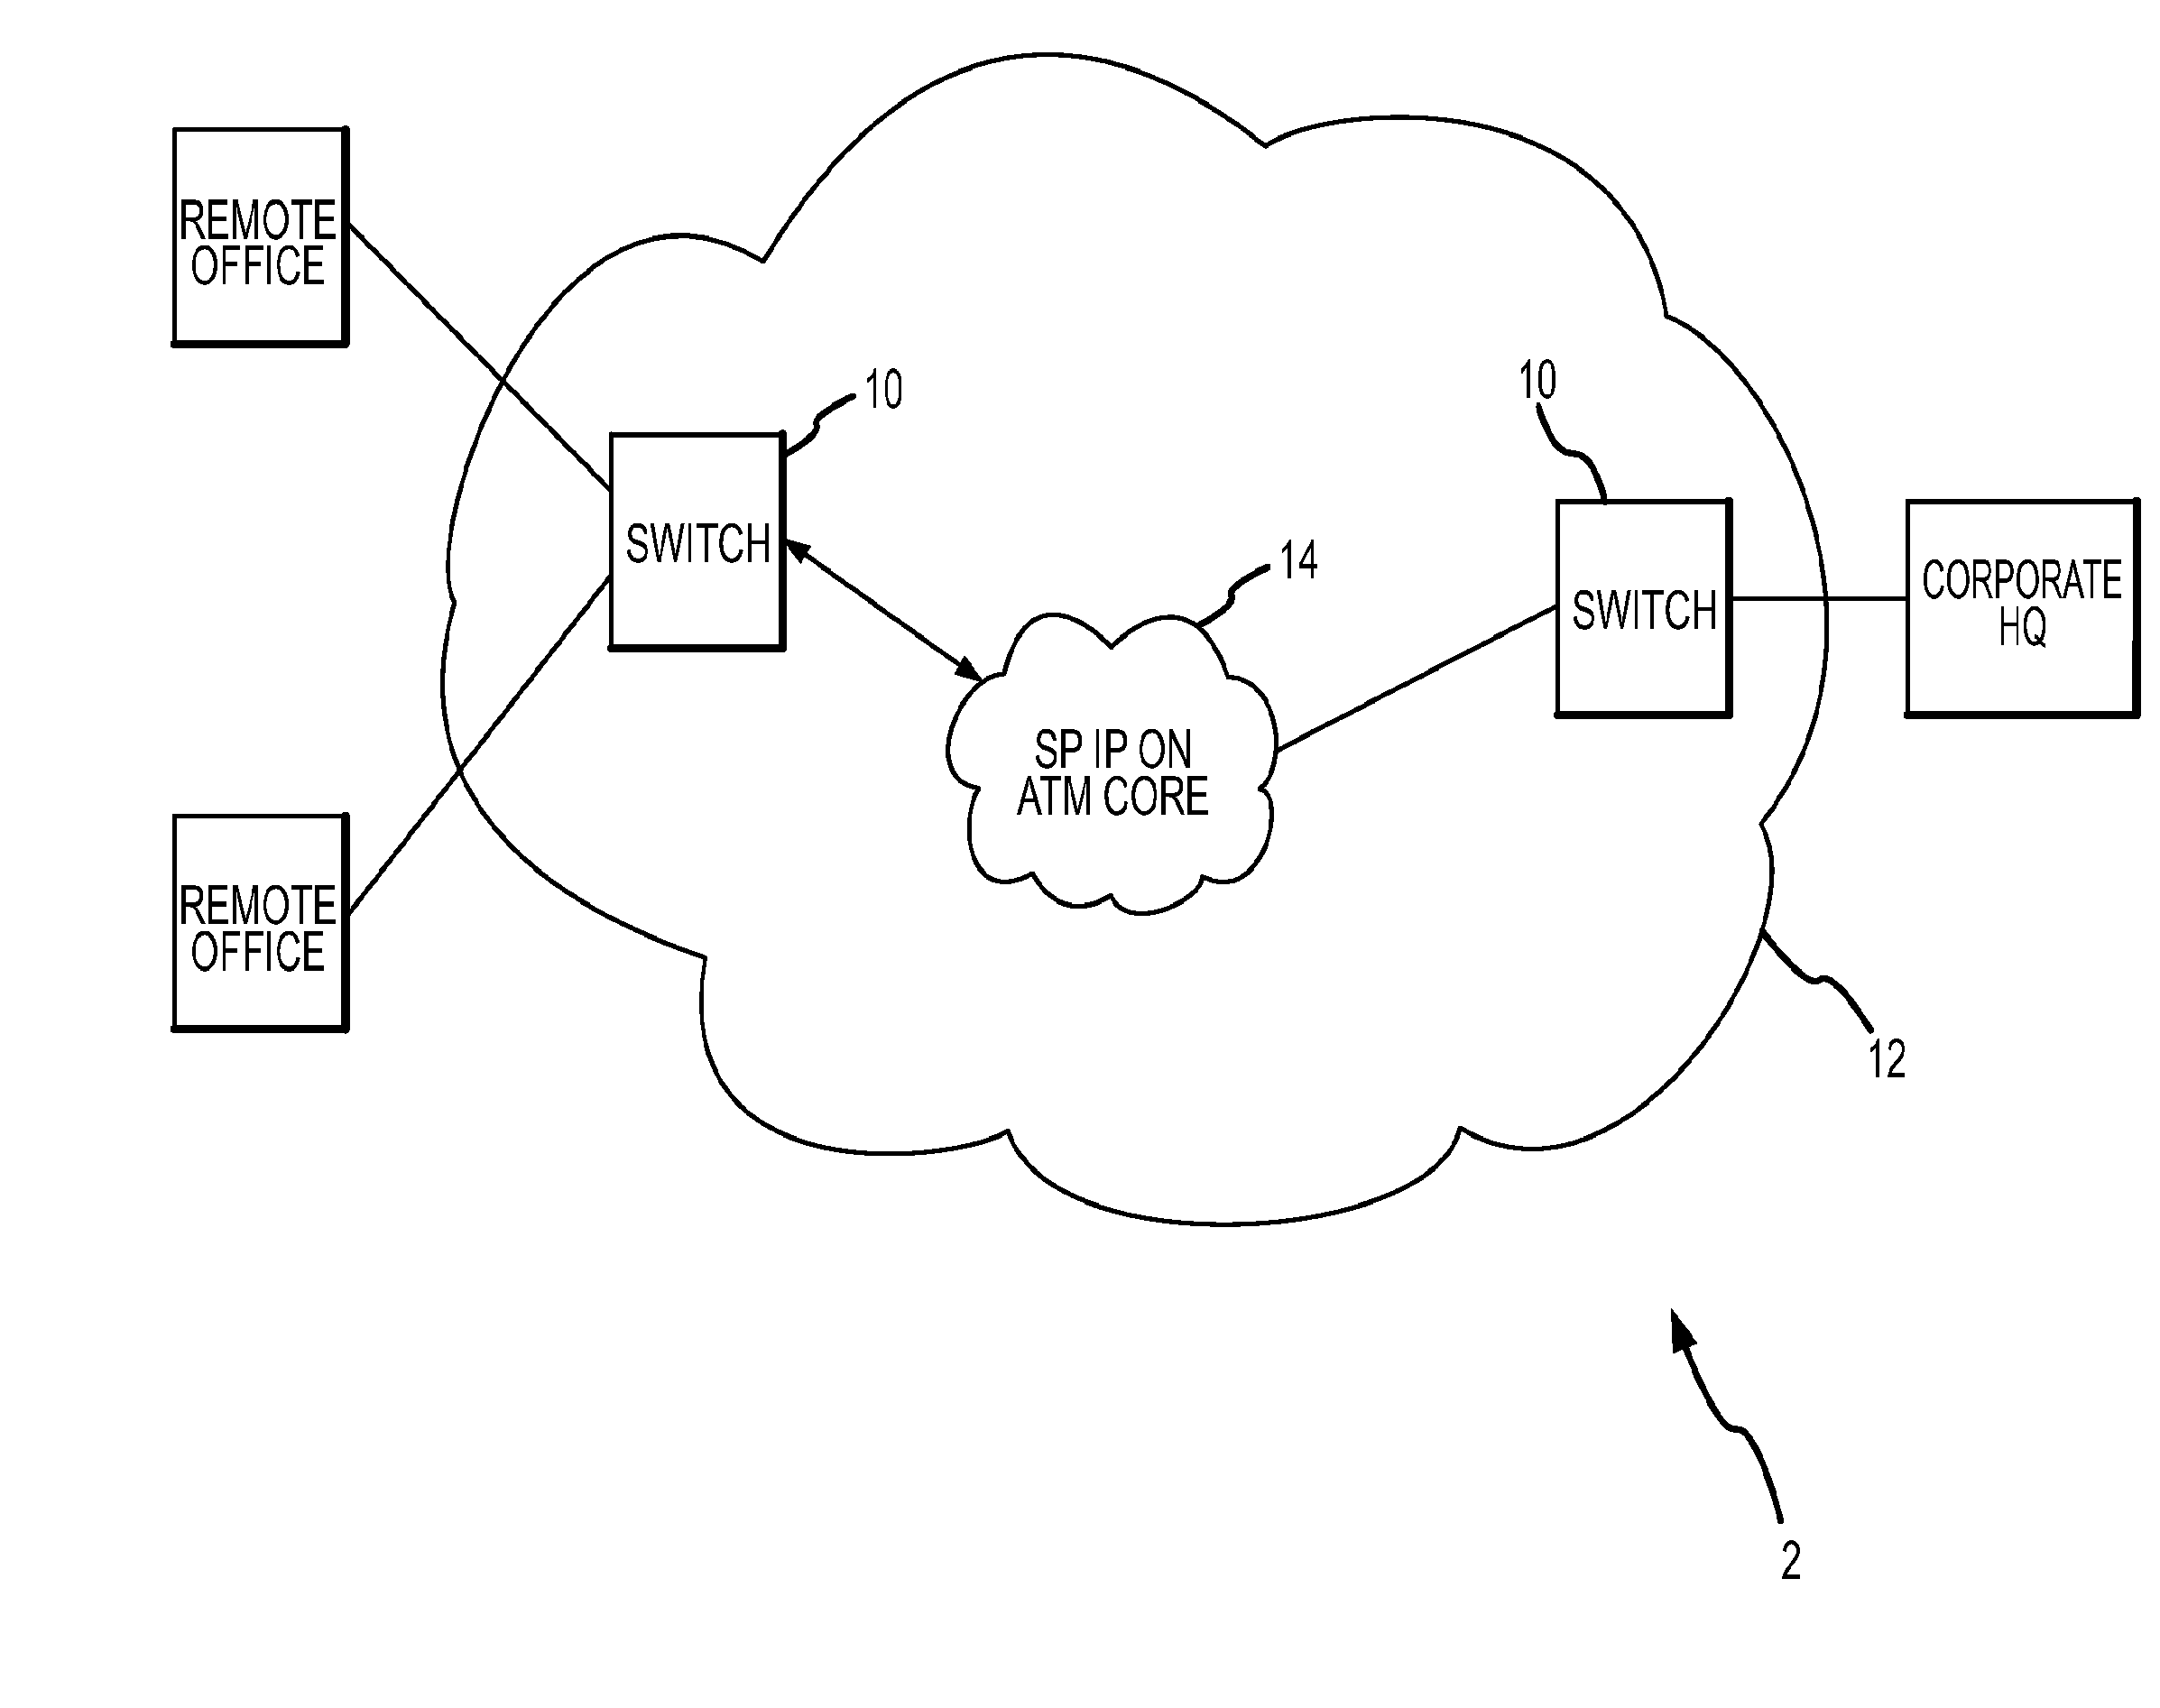 Service processing switch